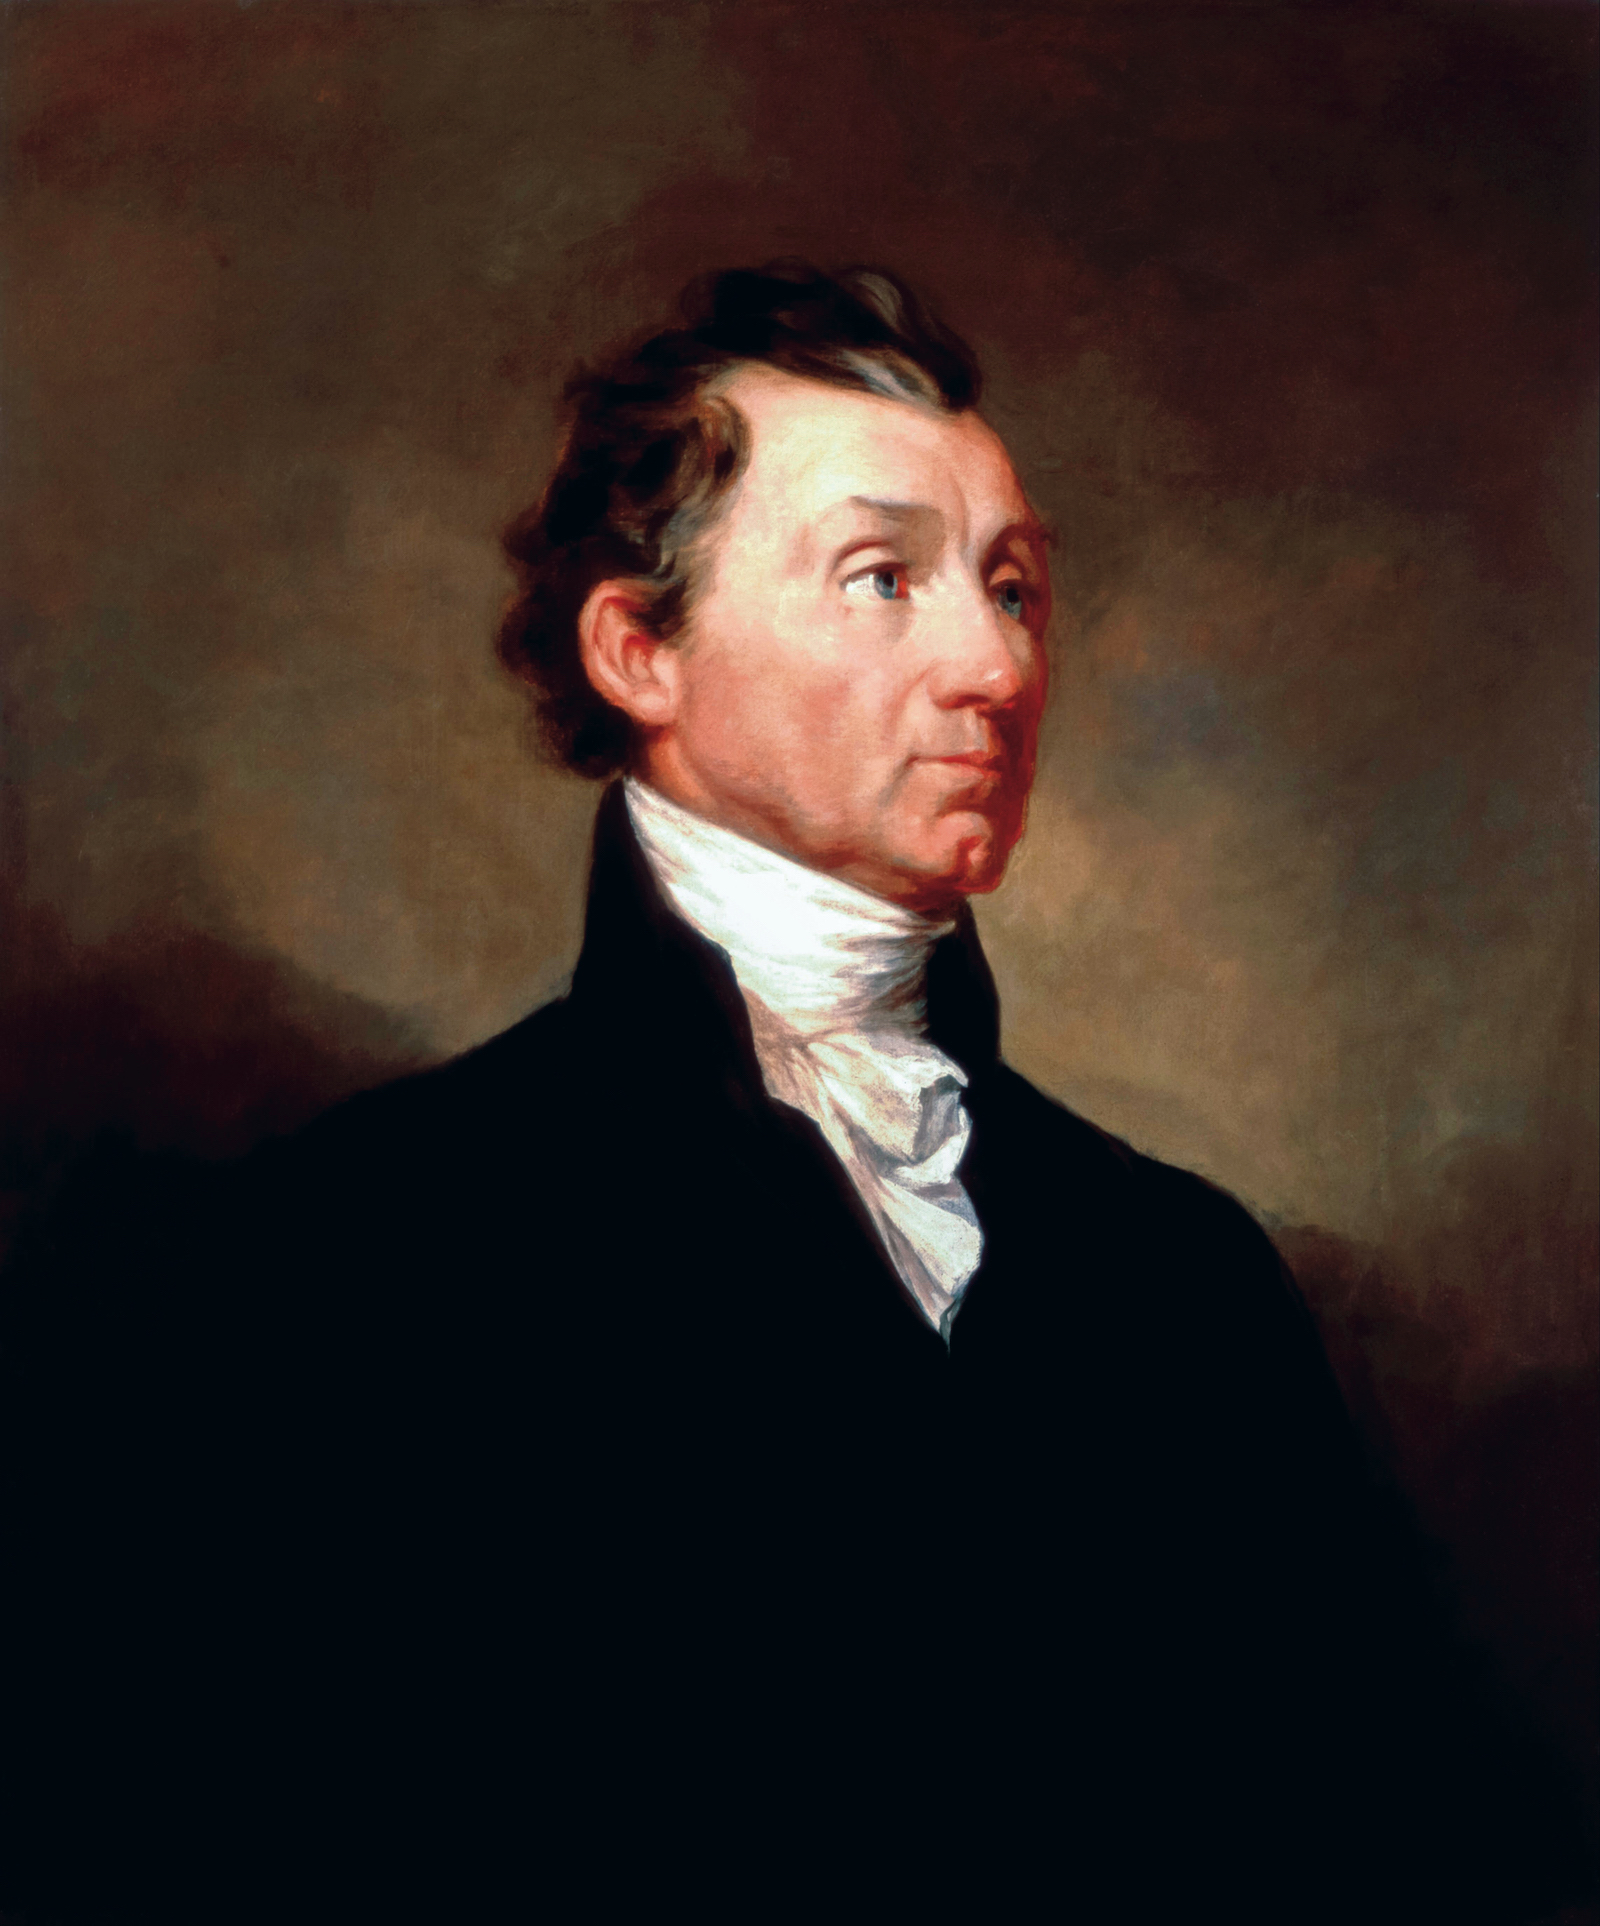 James Monroe,  by Samuel Morse, c.1819. National Portrait Gallery, Smithsonian Institution; transfer from the National Gallery of Art; gift of the A.W. Mellon Educational and Charitable Trust, 1942.